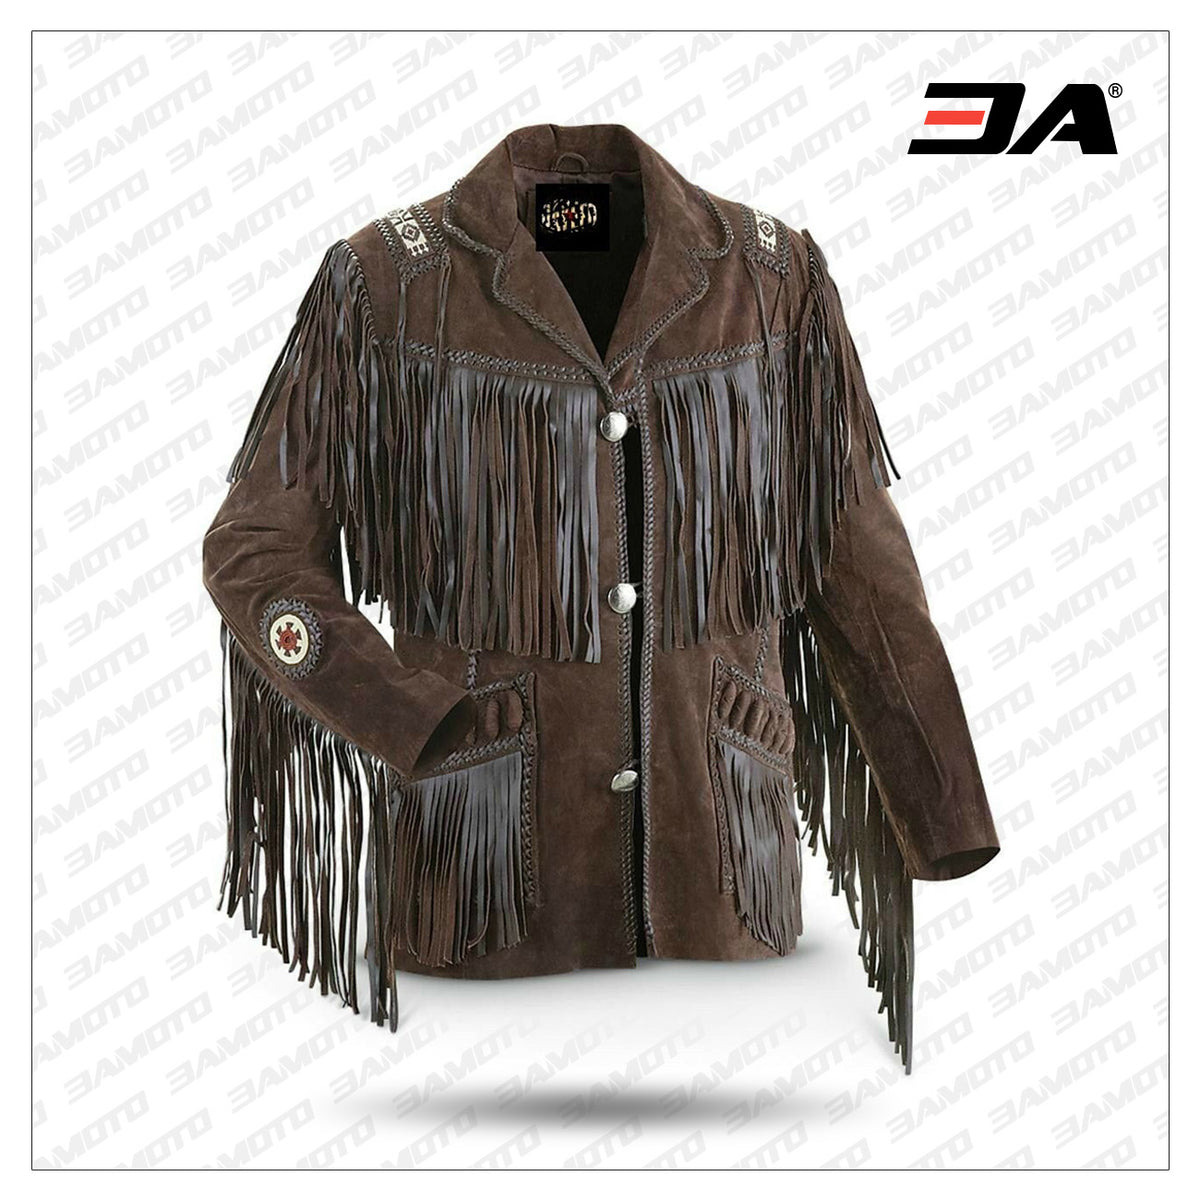 NEW Mens Traditional Western Cowboy wear Brown Suede Leather Jacket with fringe